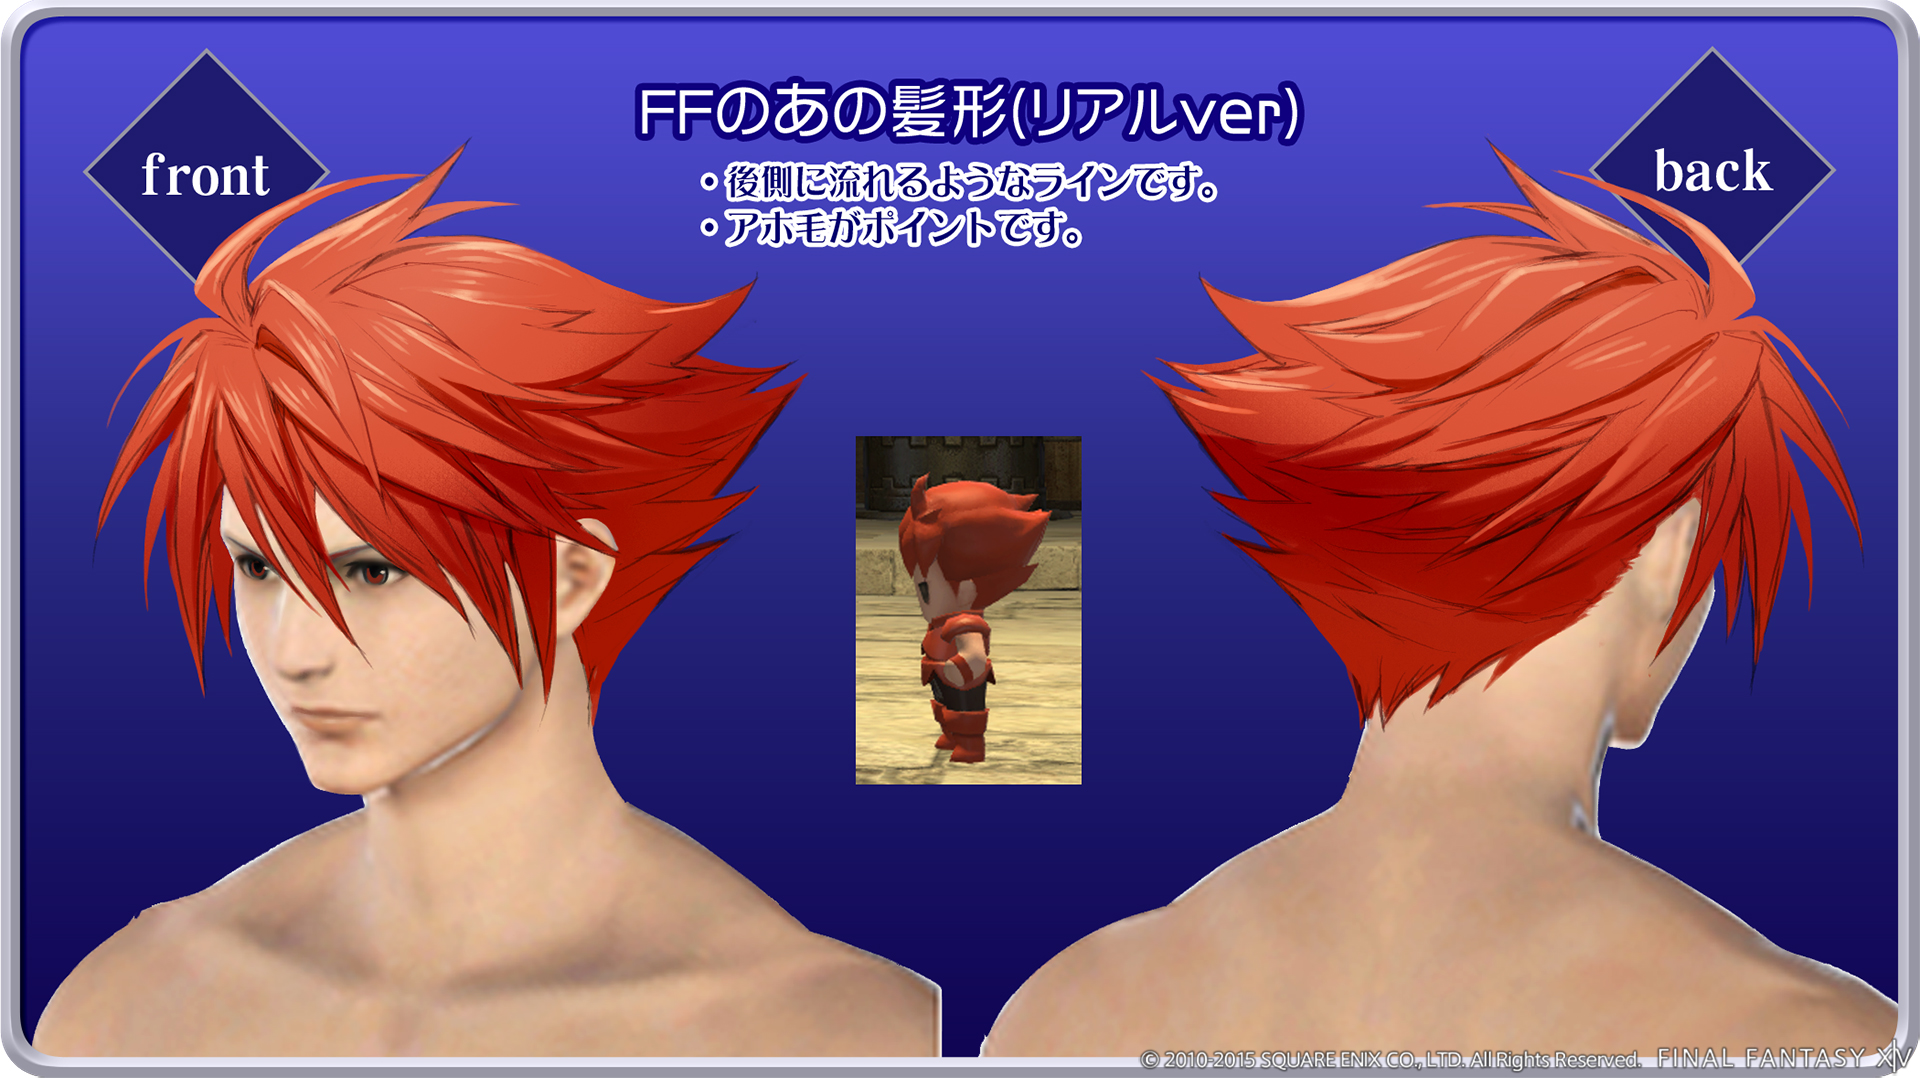 Announcing the Winners of the Hairstyle Design Contest! FINAL FANTASY